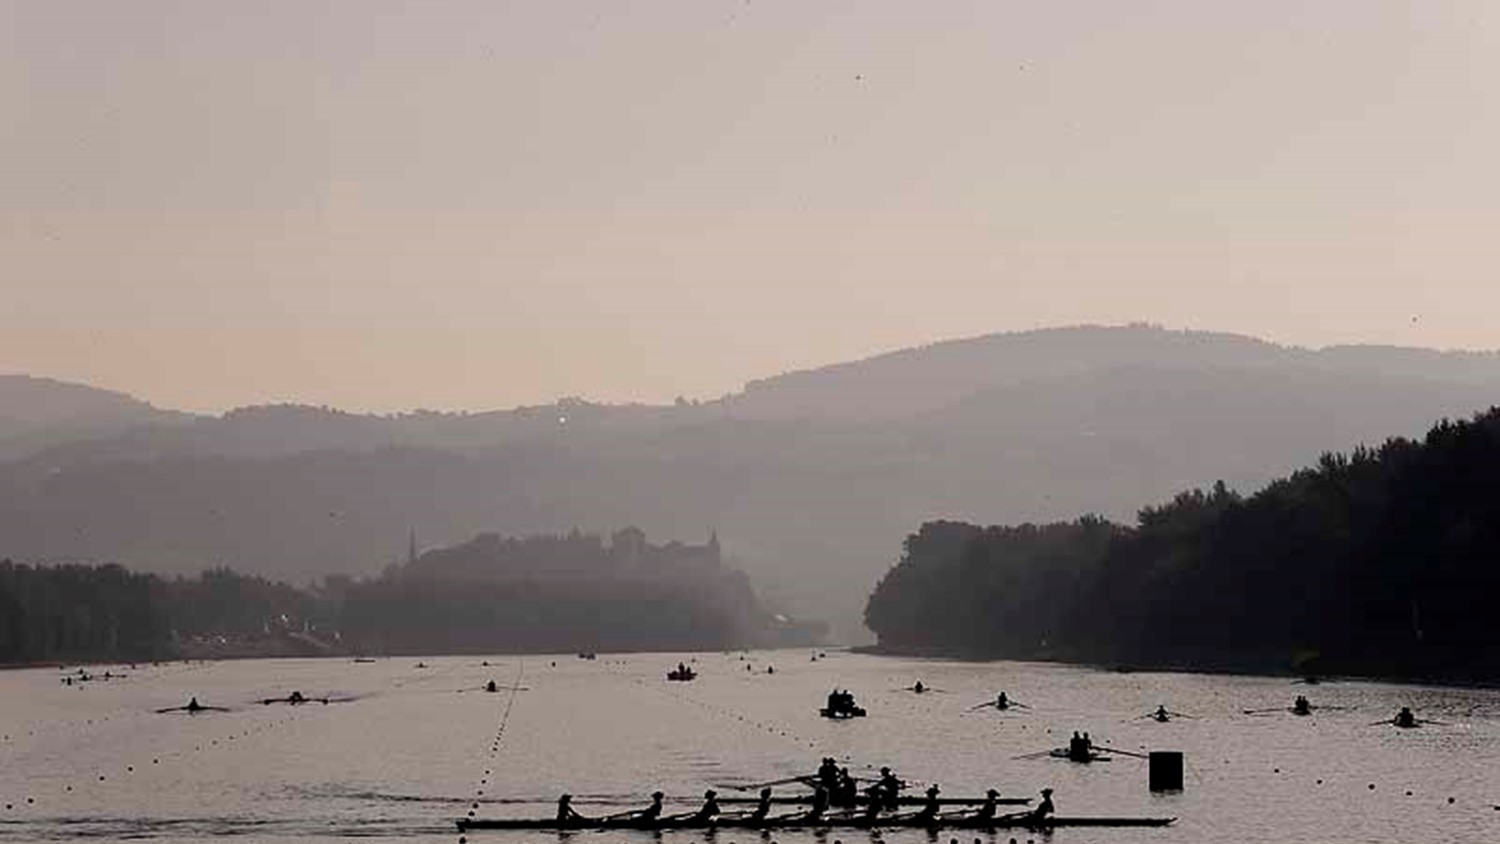 Linz-Ottensheim in Austria is ready to host the second stage of the 2018 World Rowing Cup ©World Rowing/Igor Meijer